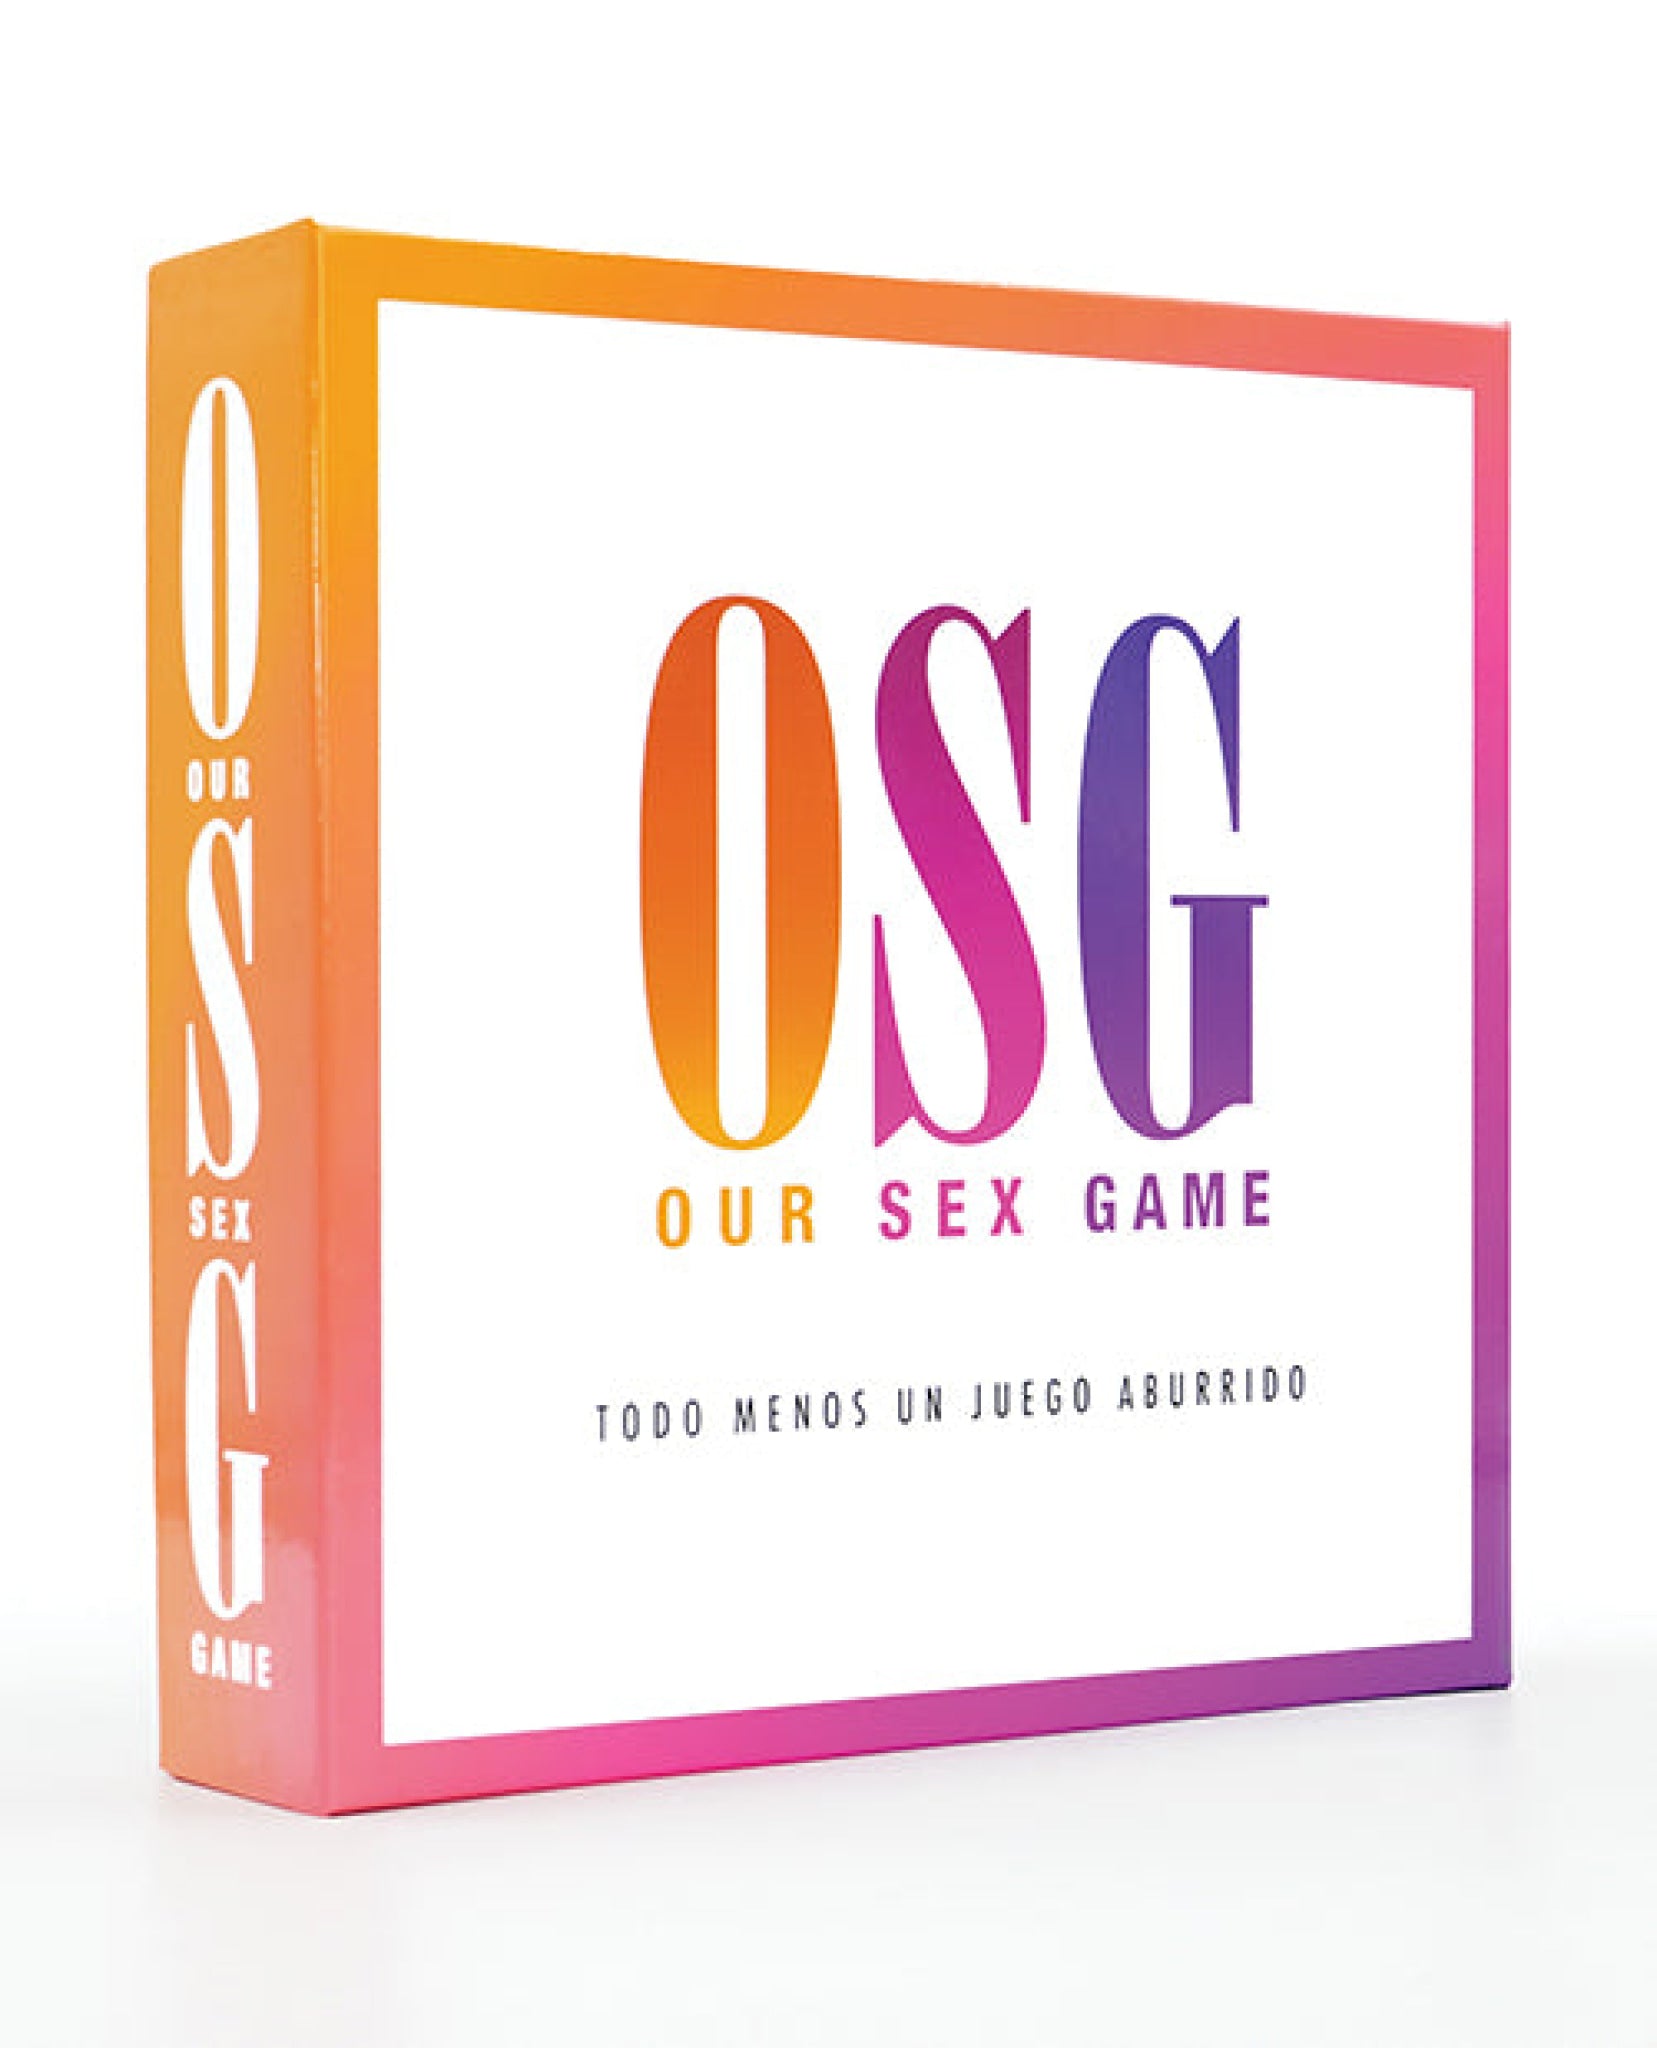 Our Sex Game - Spanish Version Creative Conceptions